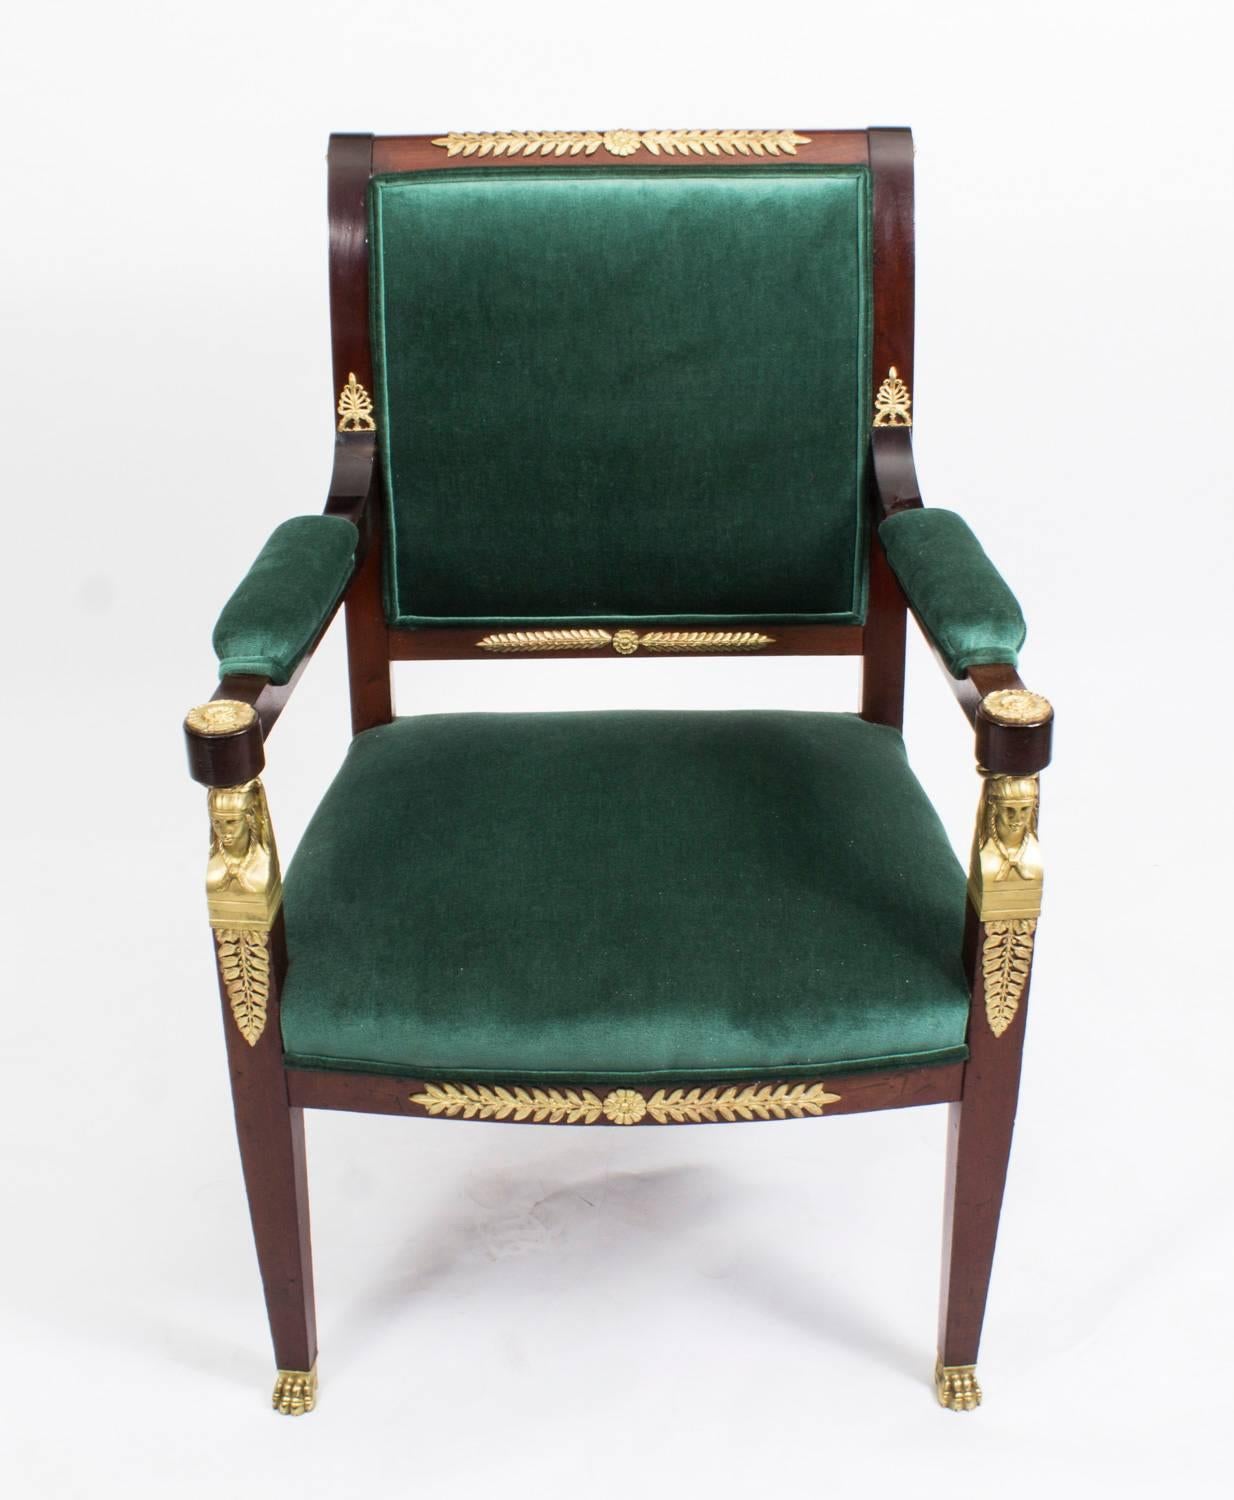 This is a beautiful antique Napoleon III mahogany fauteiul or open armchair in the fabulous Empire Style, circa 1850 in date. 

The mahogany is beautiful in colour and has been embellished with striking ormolu mounts. The padded arms have gilt